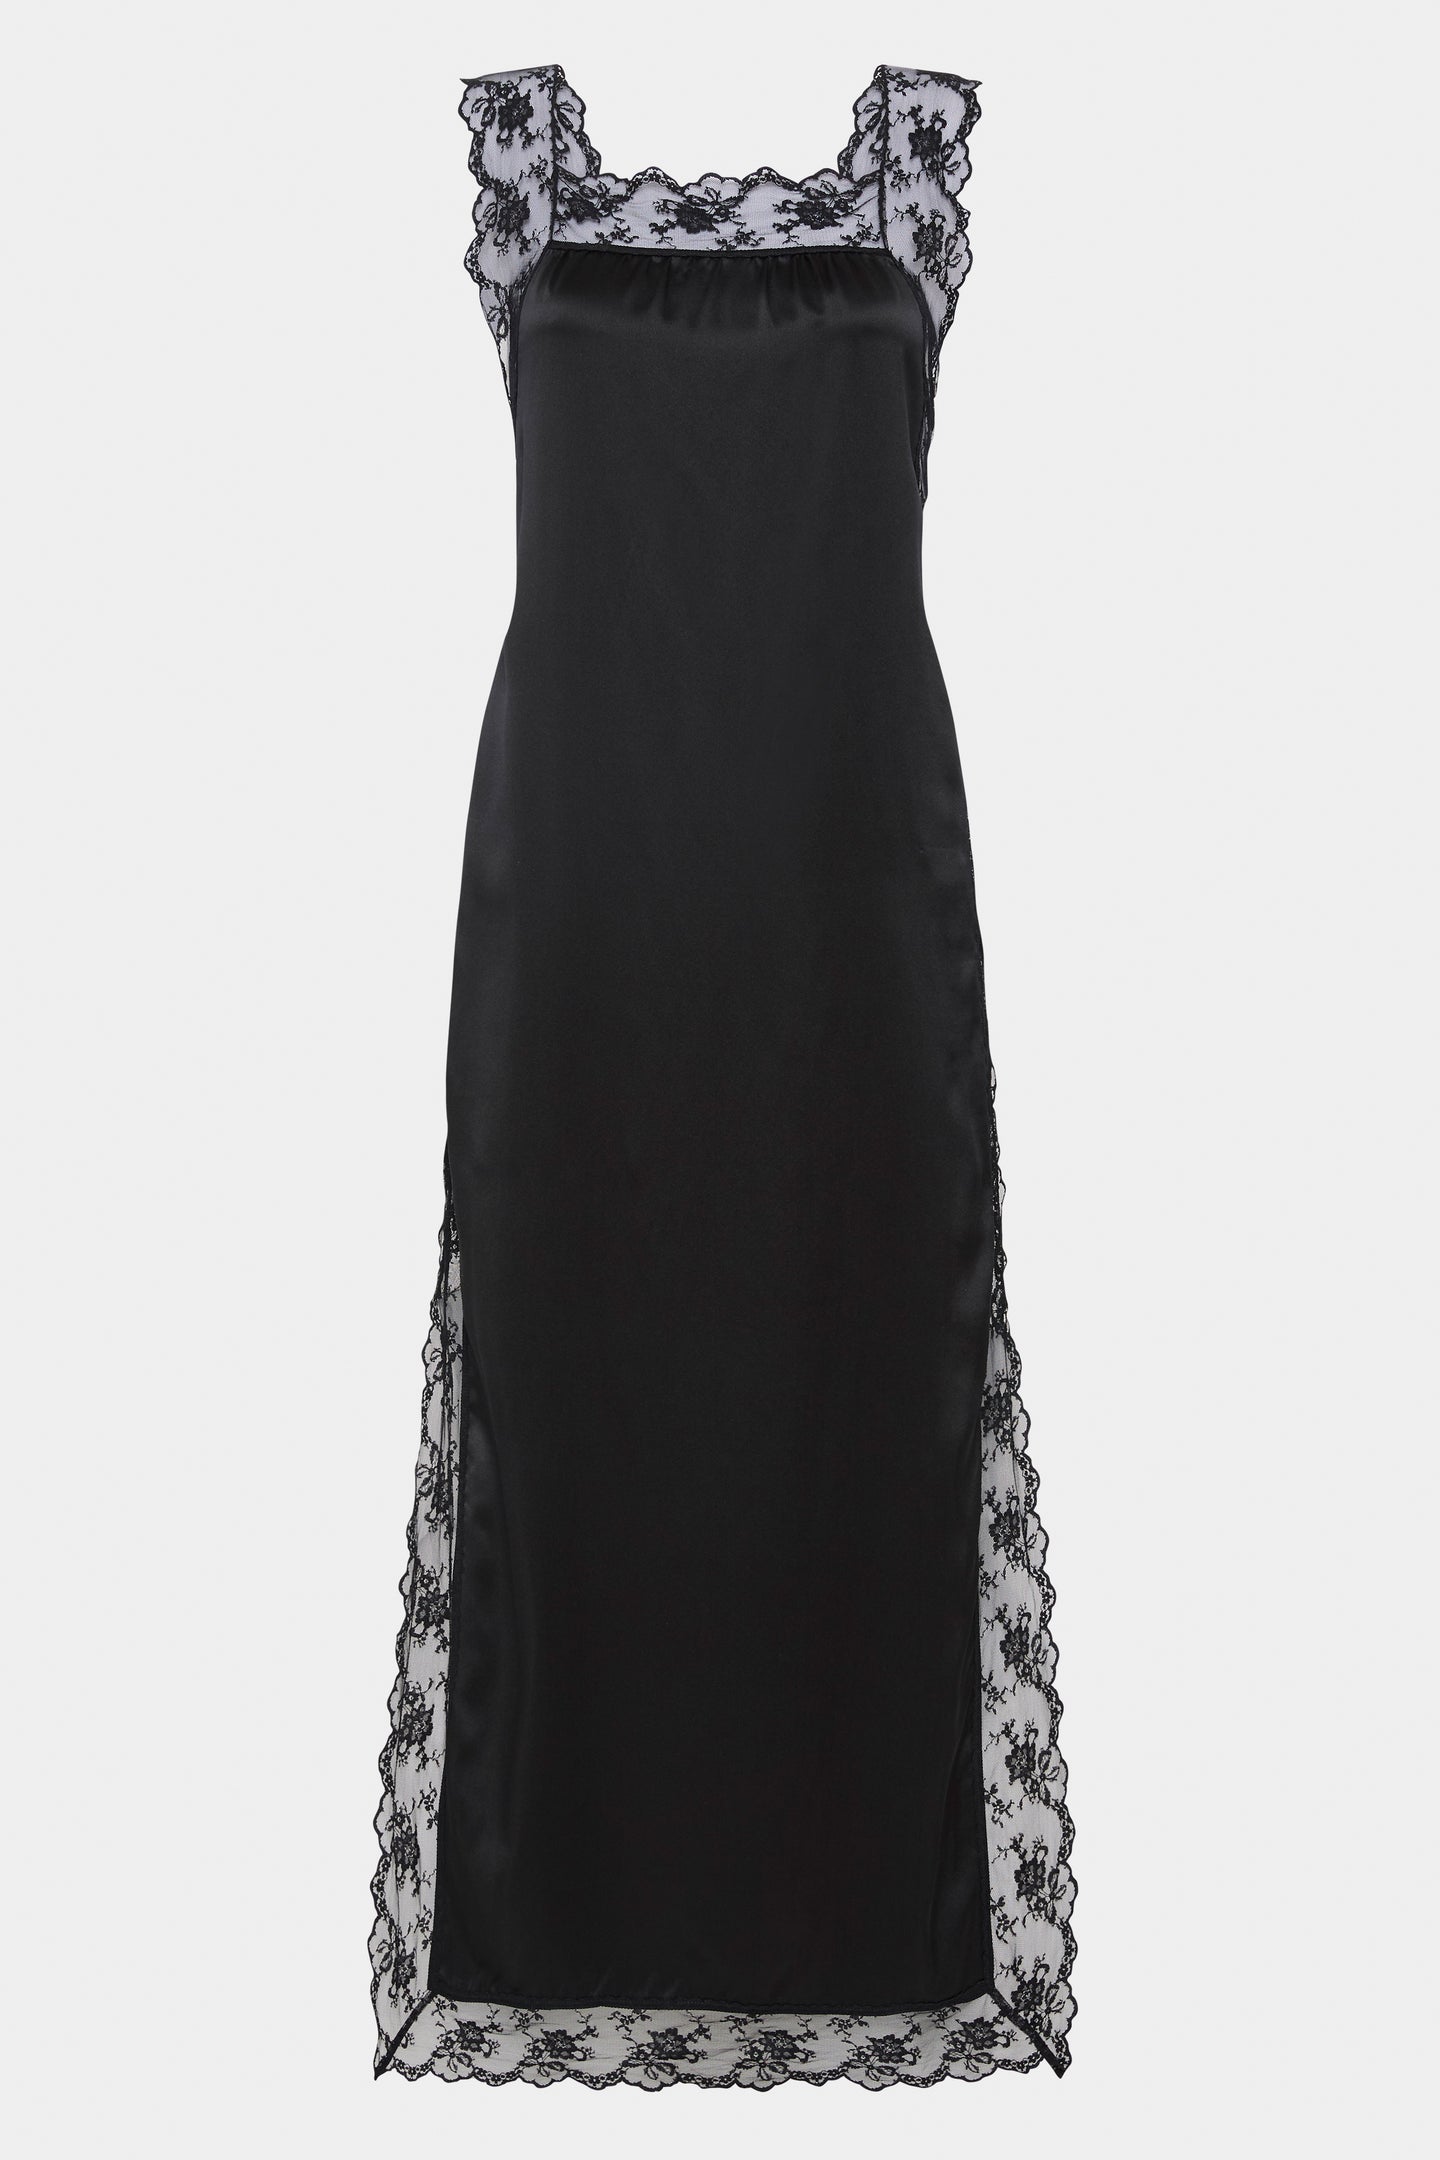 SIR the label Aries Square Neck Lace Slip BLACK